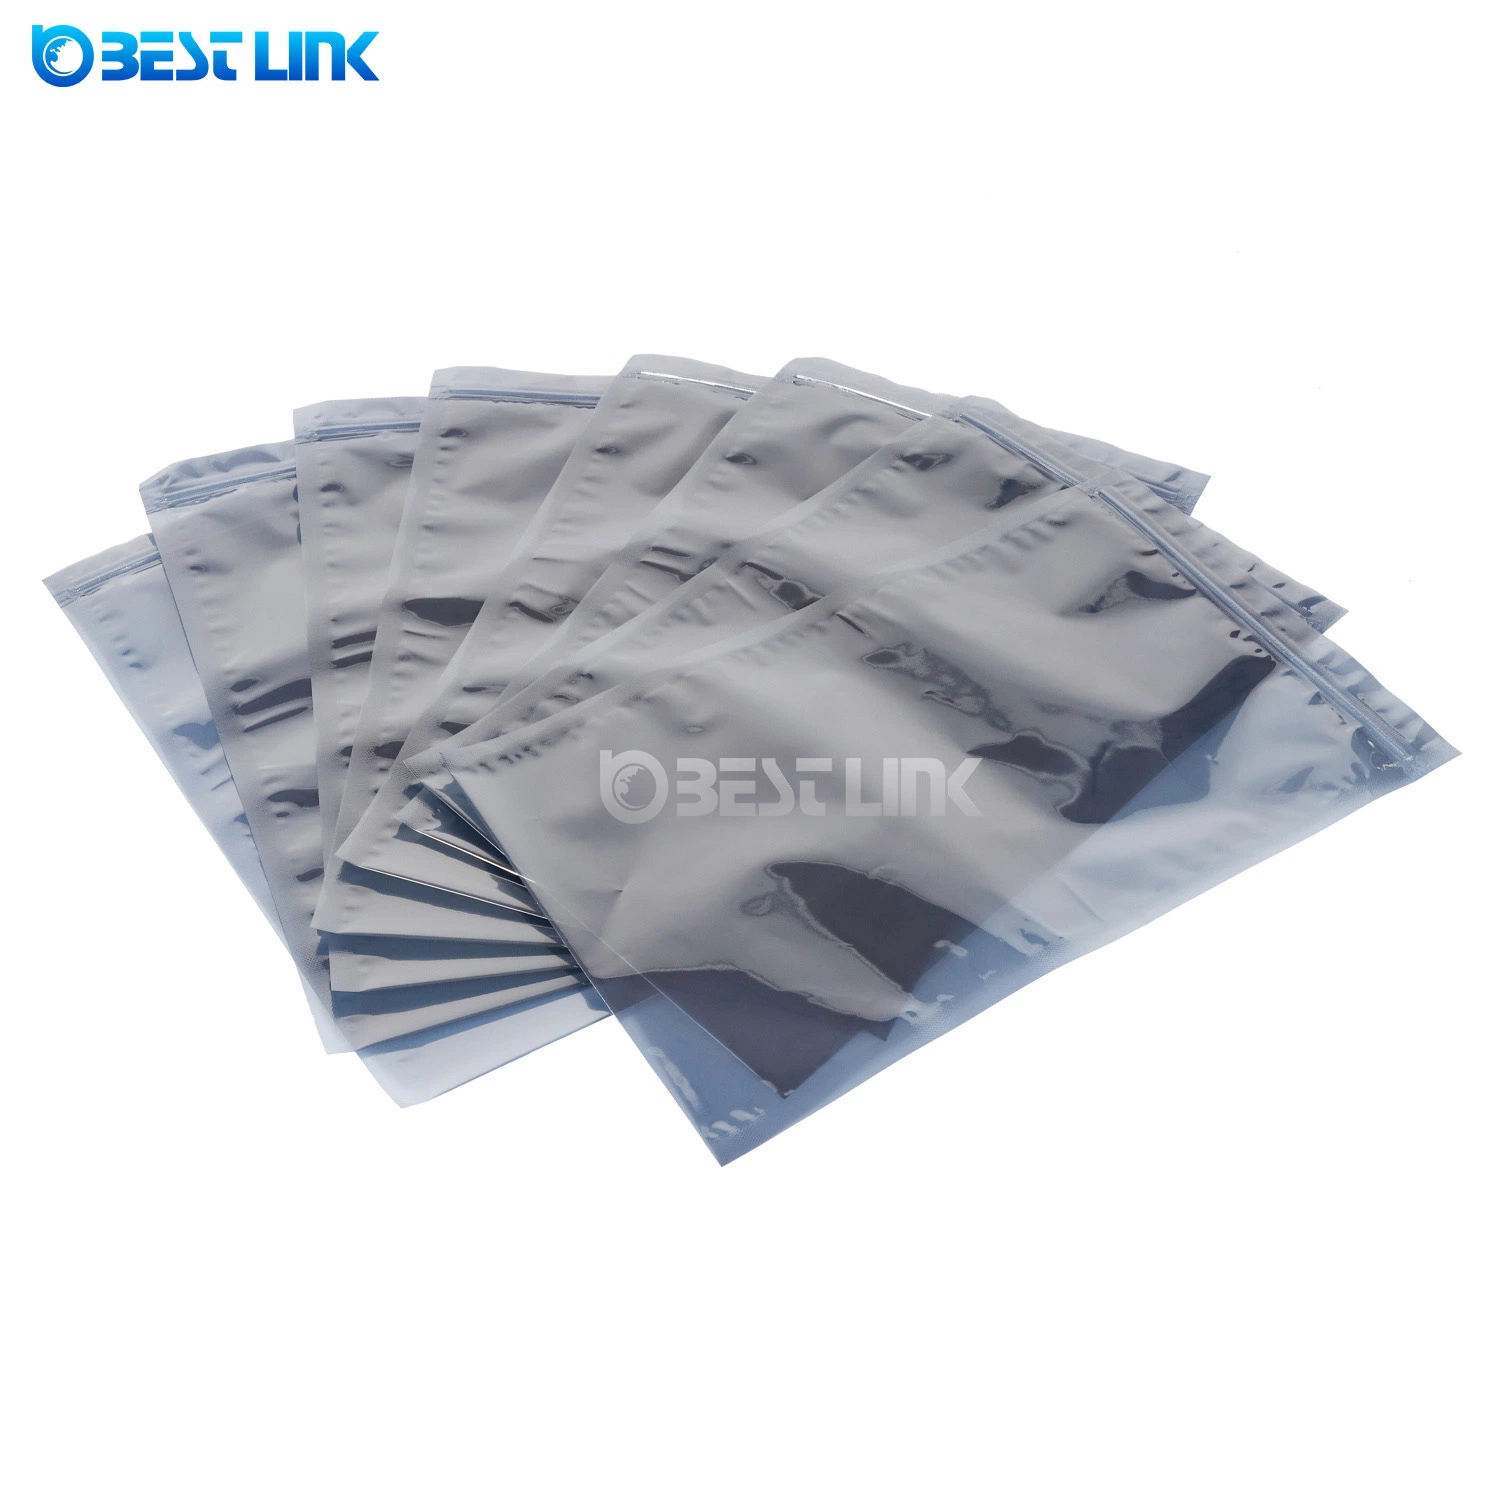 ESD Shielding Bags Poly Bags Static Shielding Bags with Zip-Lock / Open-Top for Packaging Electronic Products